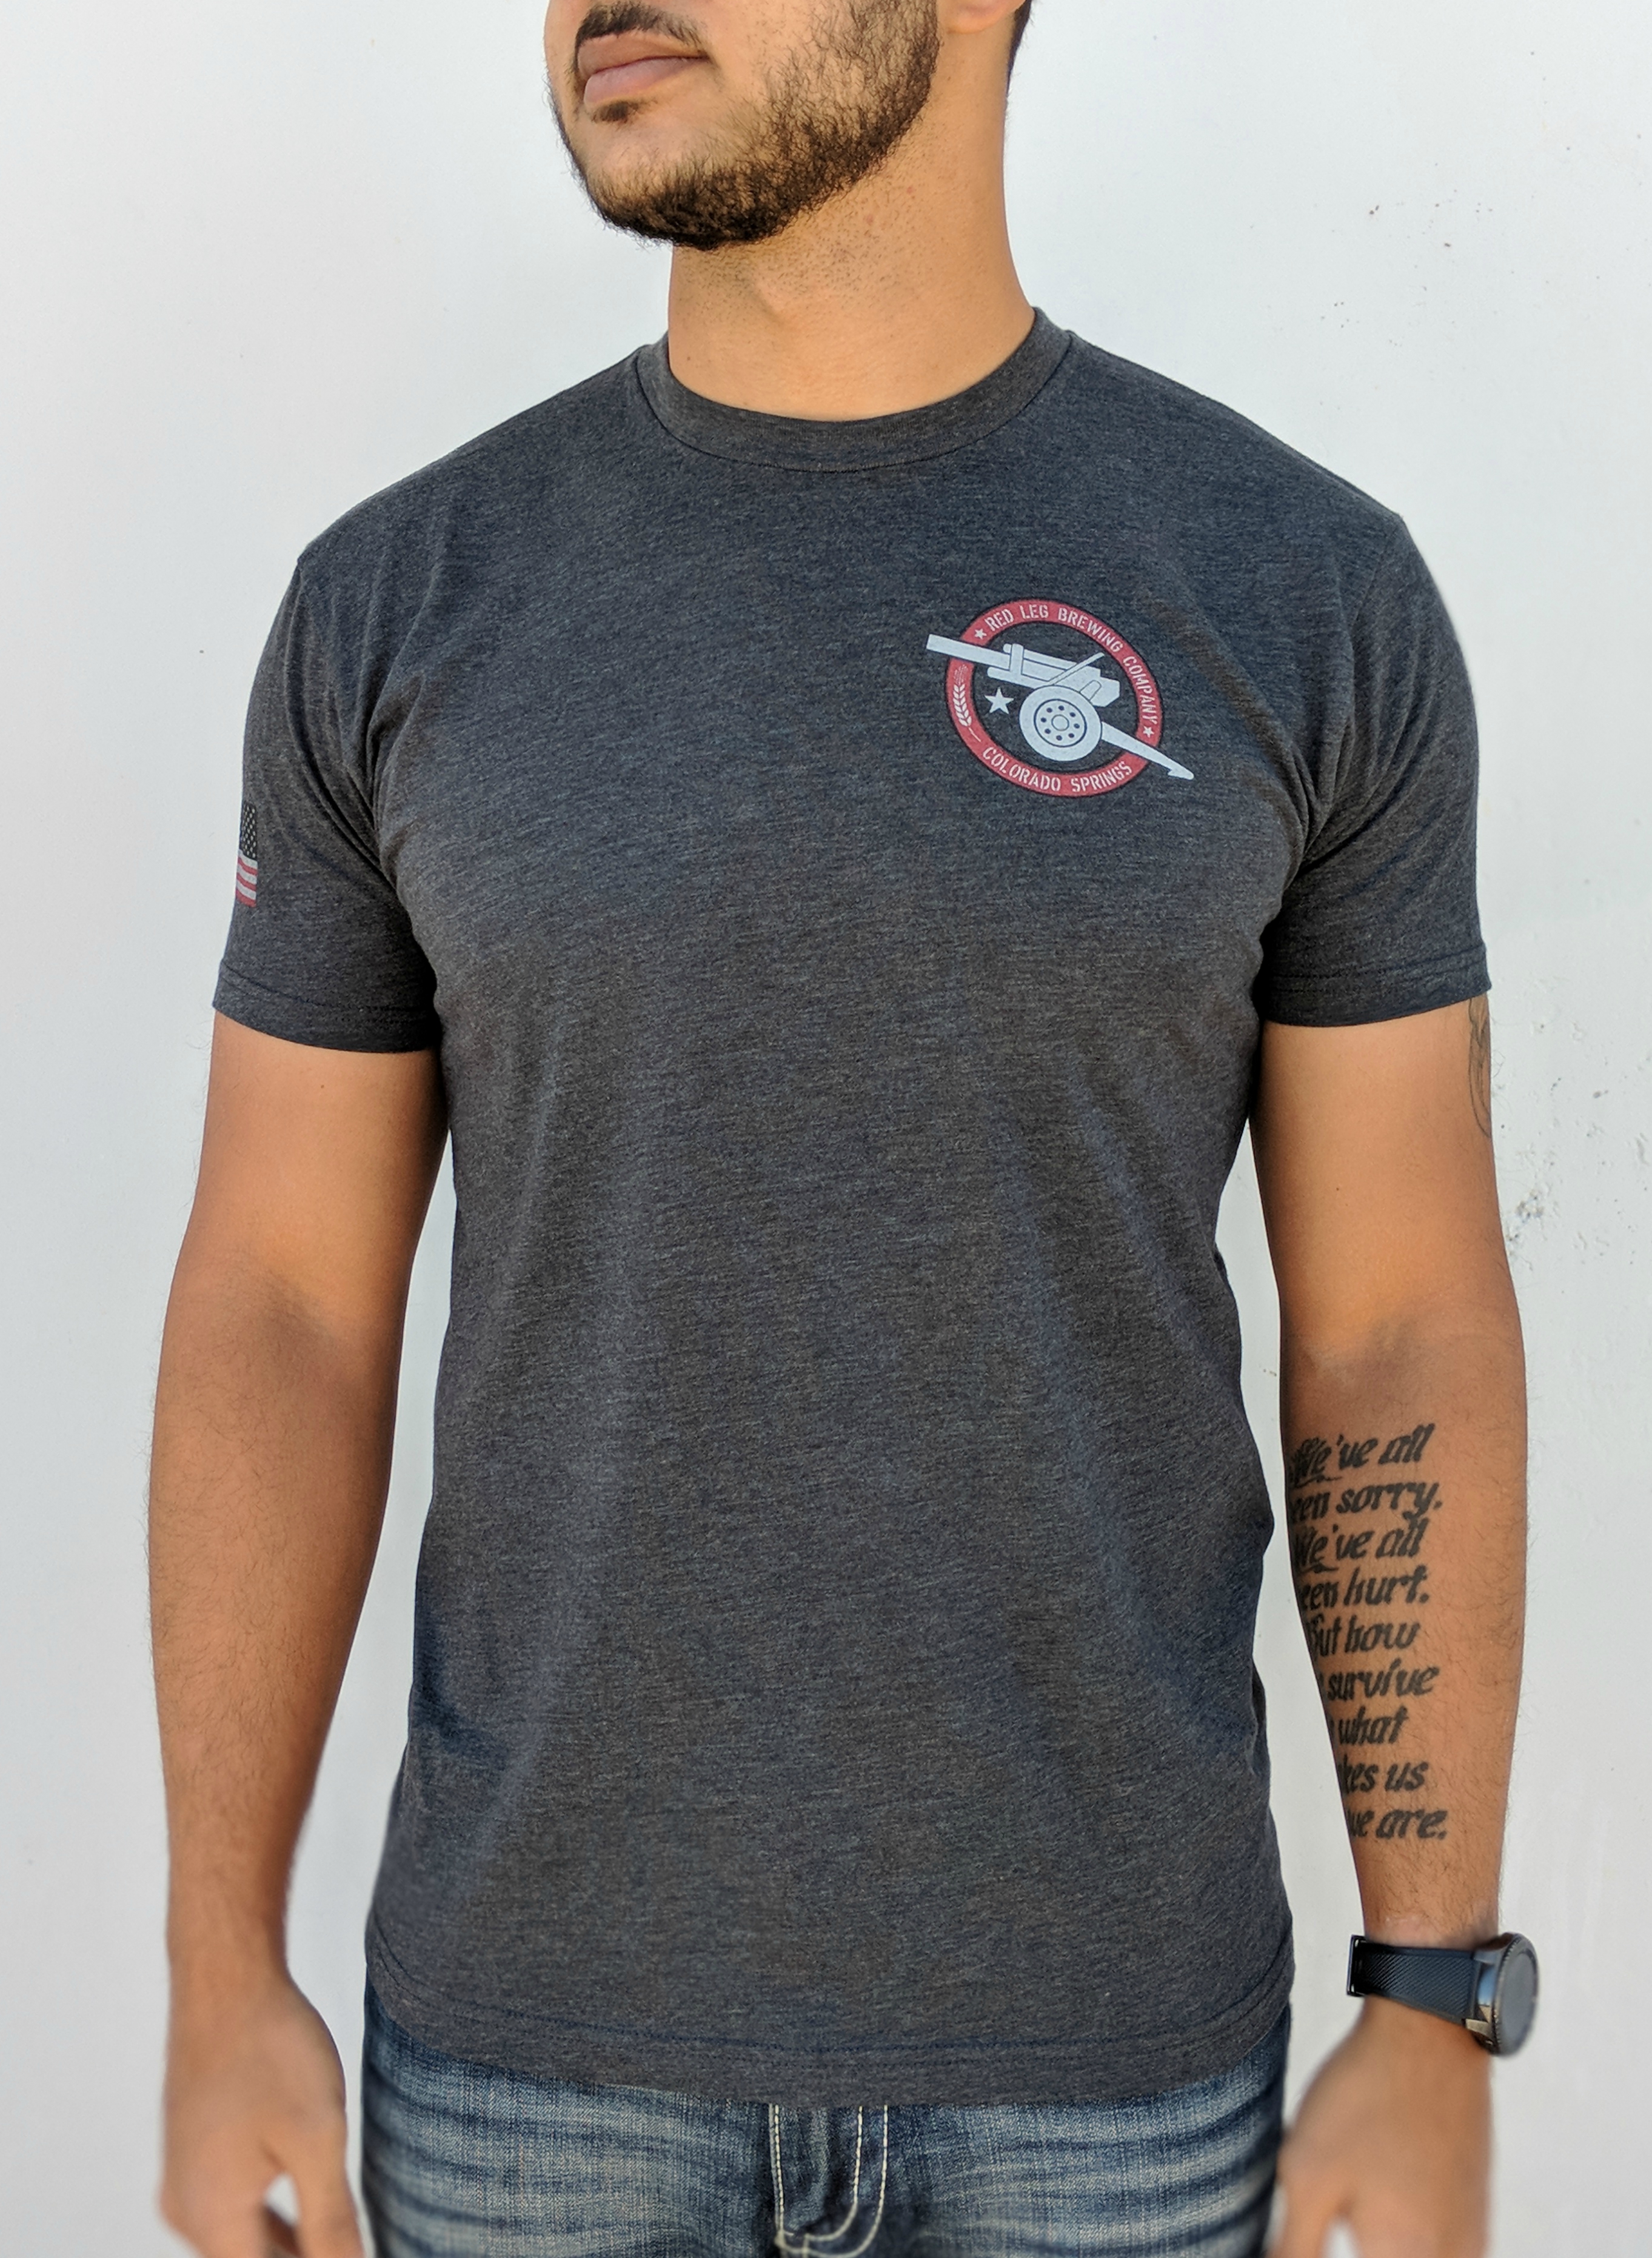 Download T-Shirt (Grey) - Unisex - Red Leg Brewing Company